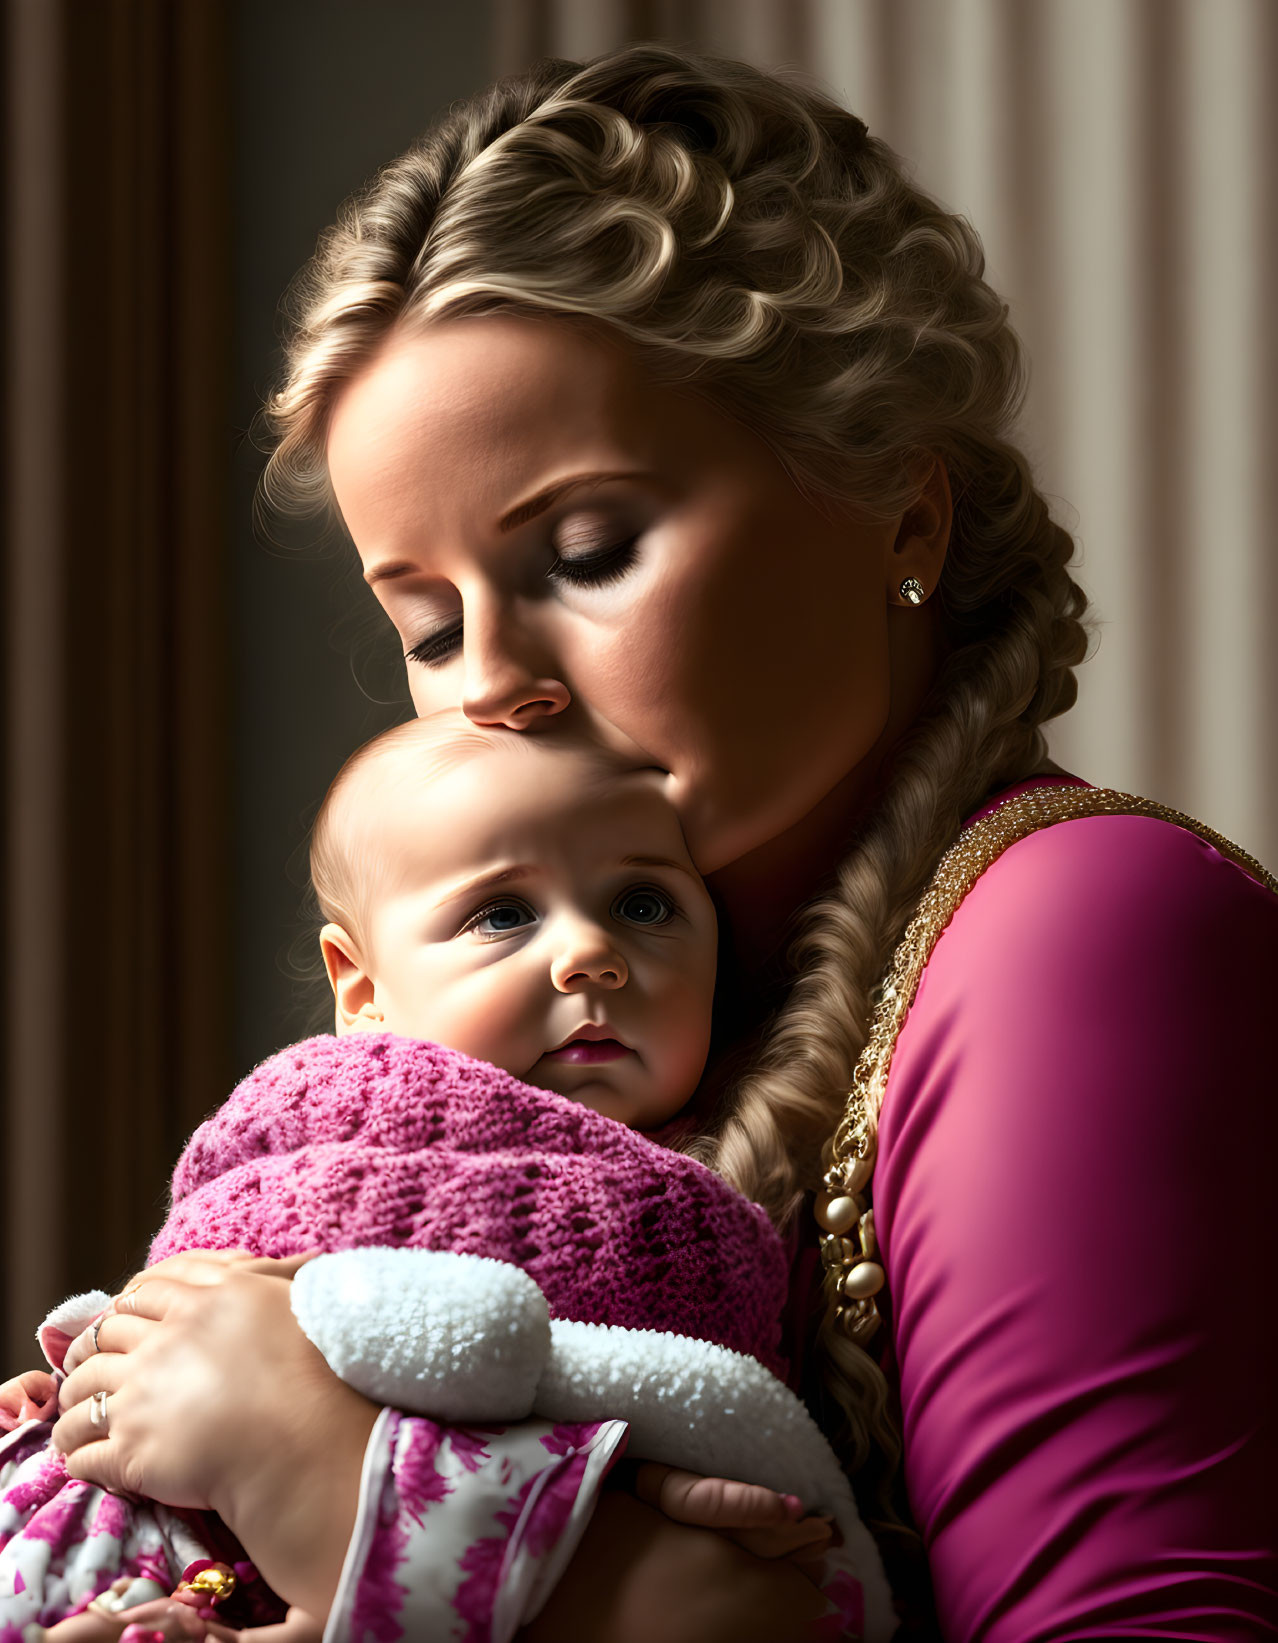 Mother with Braided Hair Embracing Baby in Pink Blanket